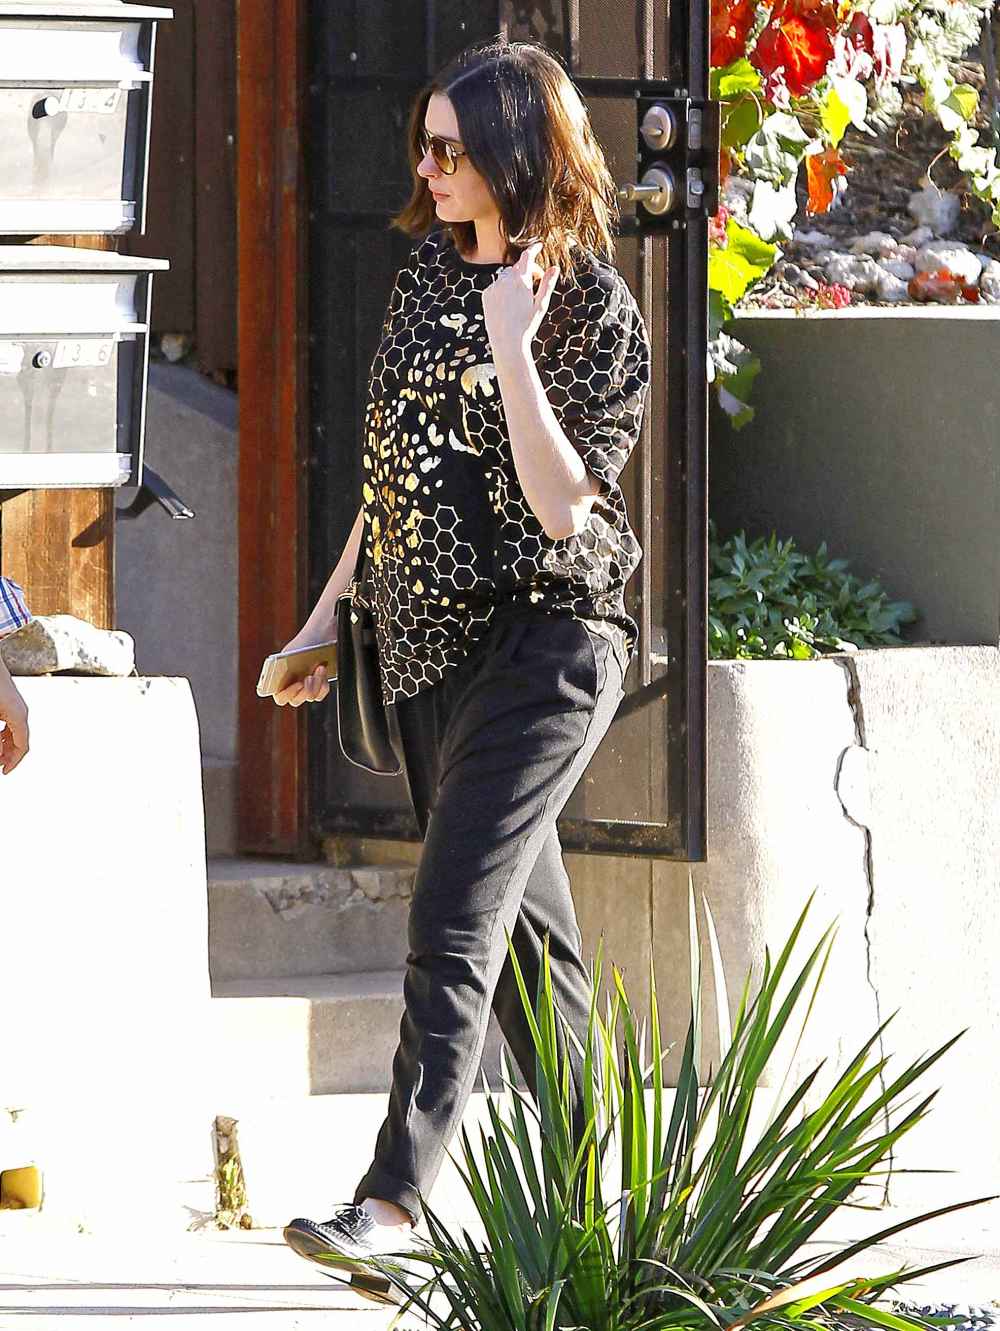 Pregnant Anne Hathaway is spotted leaving a friend's house in Echo Park, California on December 02, 2015.